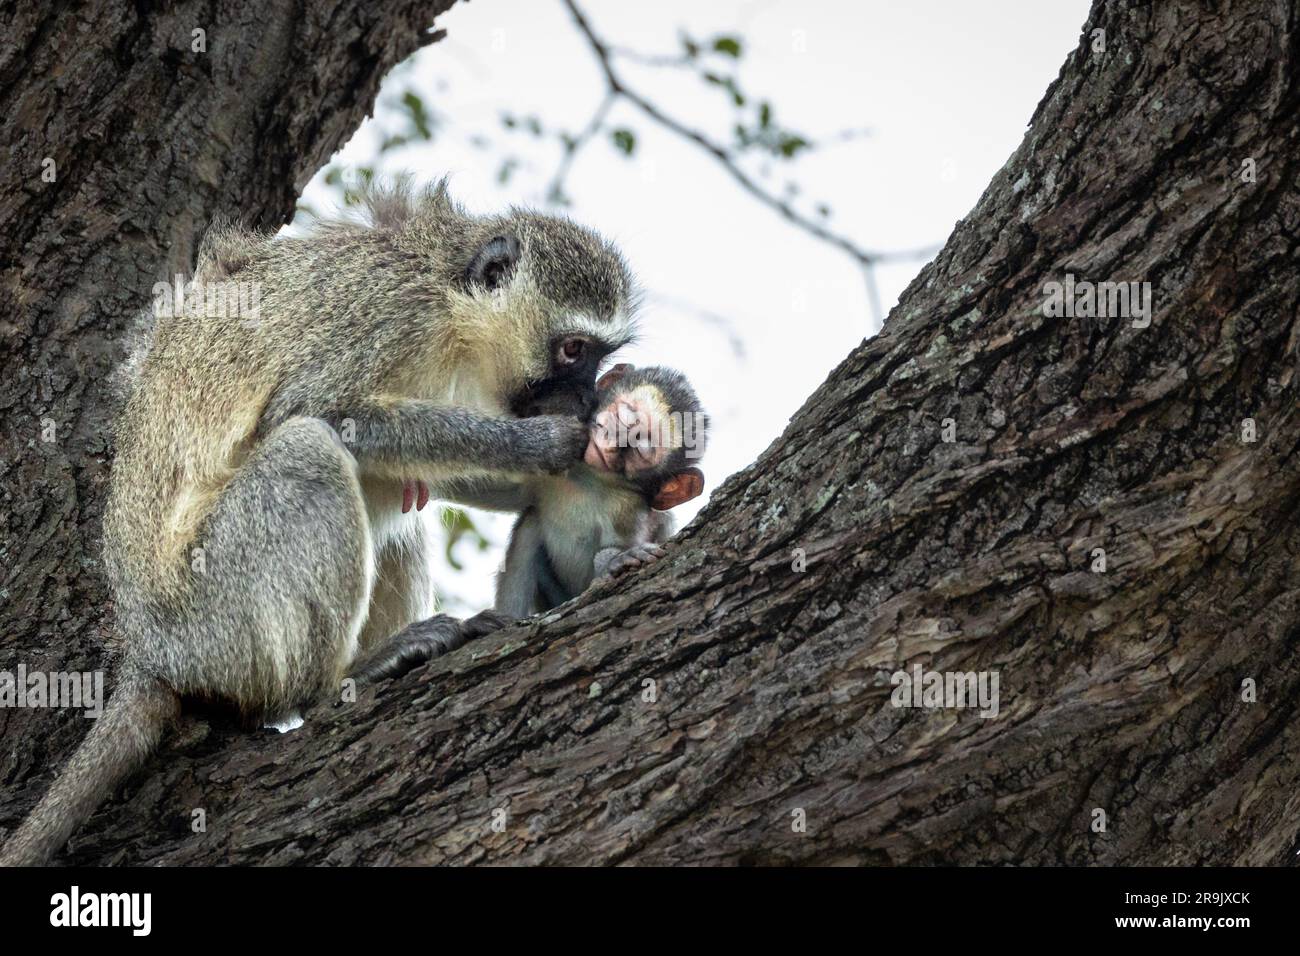 A baby vervet monkey, Chlorocebus pygerythrus, getting groomed by its mother. Stock Photo